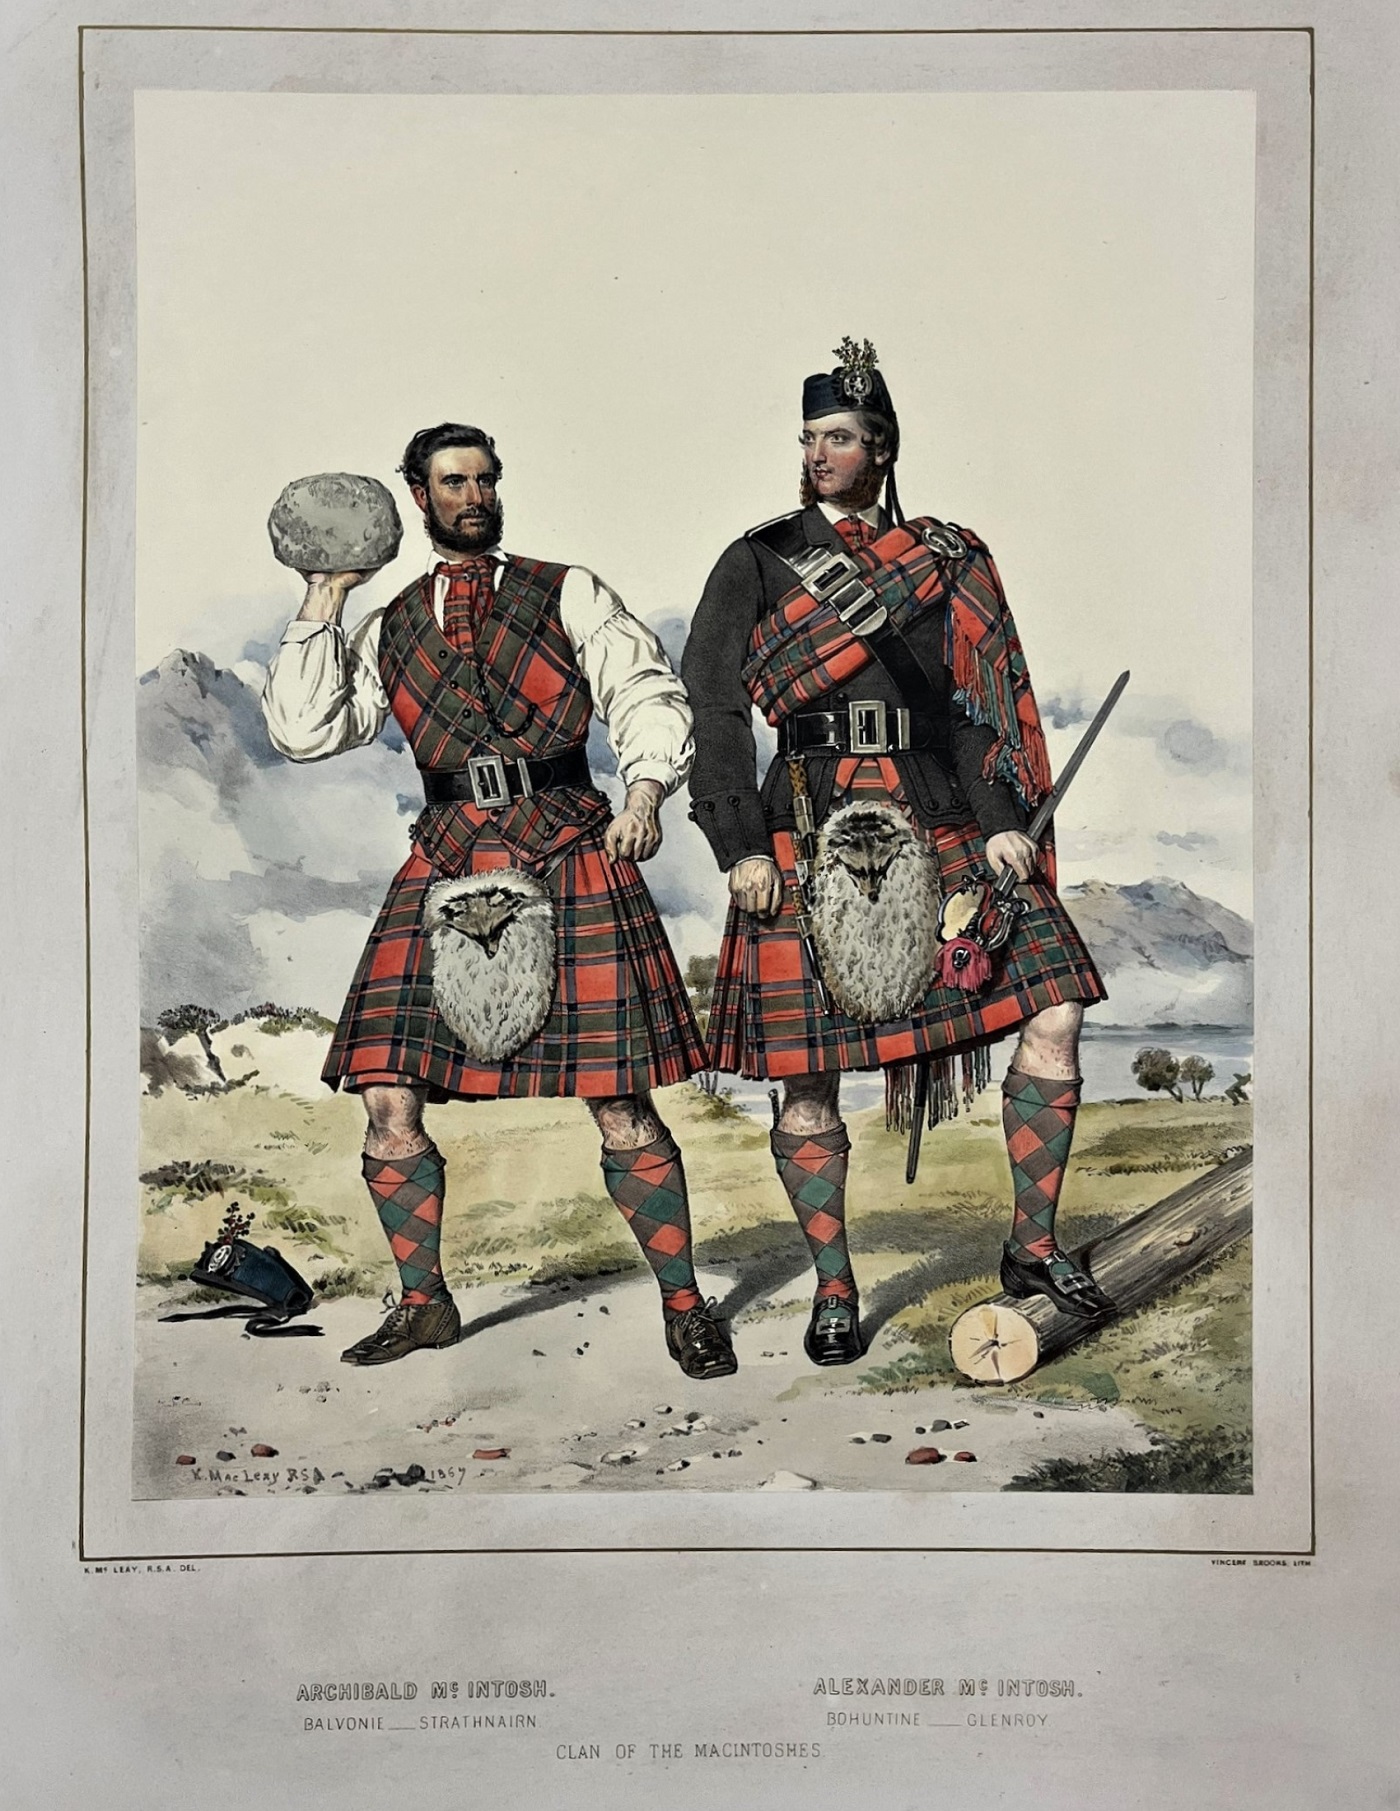 Illustration in a book showing two men in head to toe tartan (red with green stripes) standing in a mountainous, outdoor area. The man on the left holds up a large stone, the other has a broadsword at his hip.